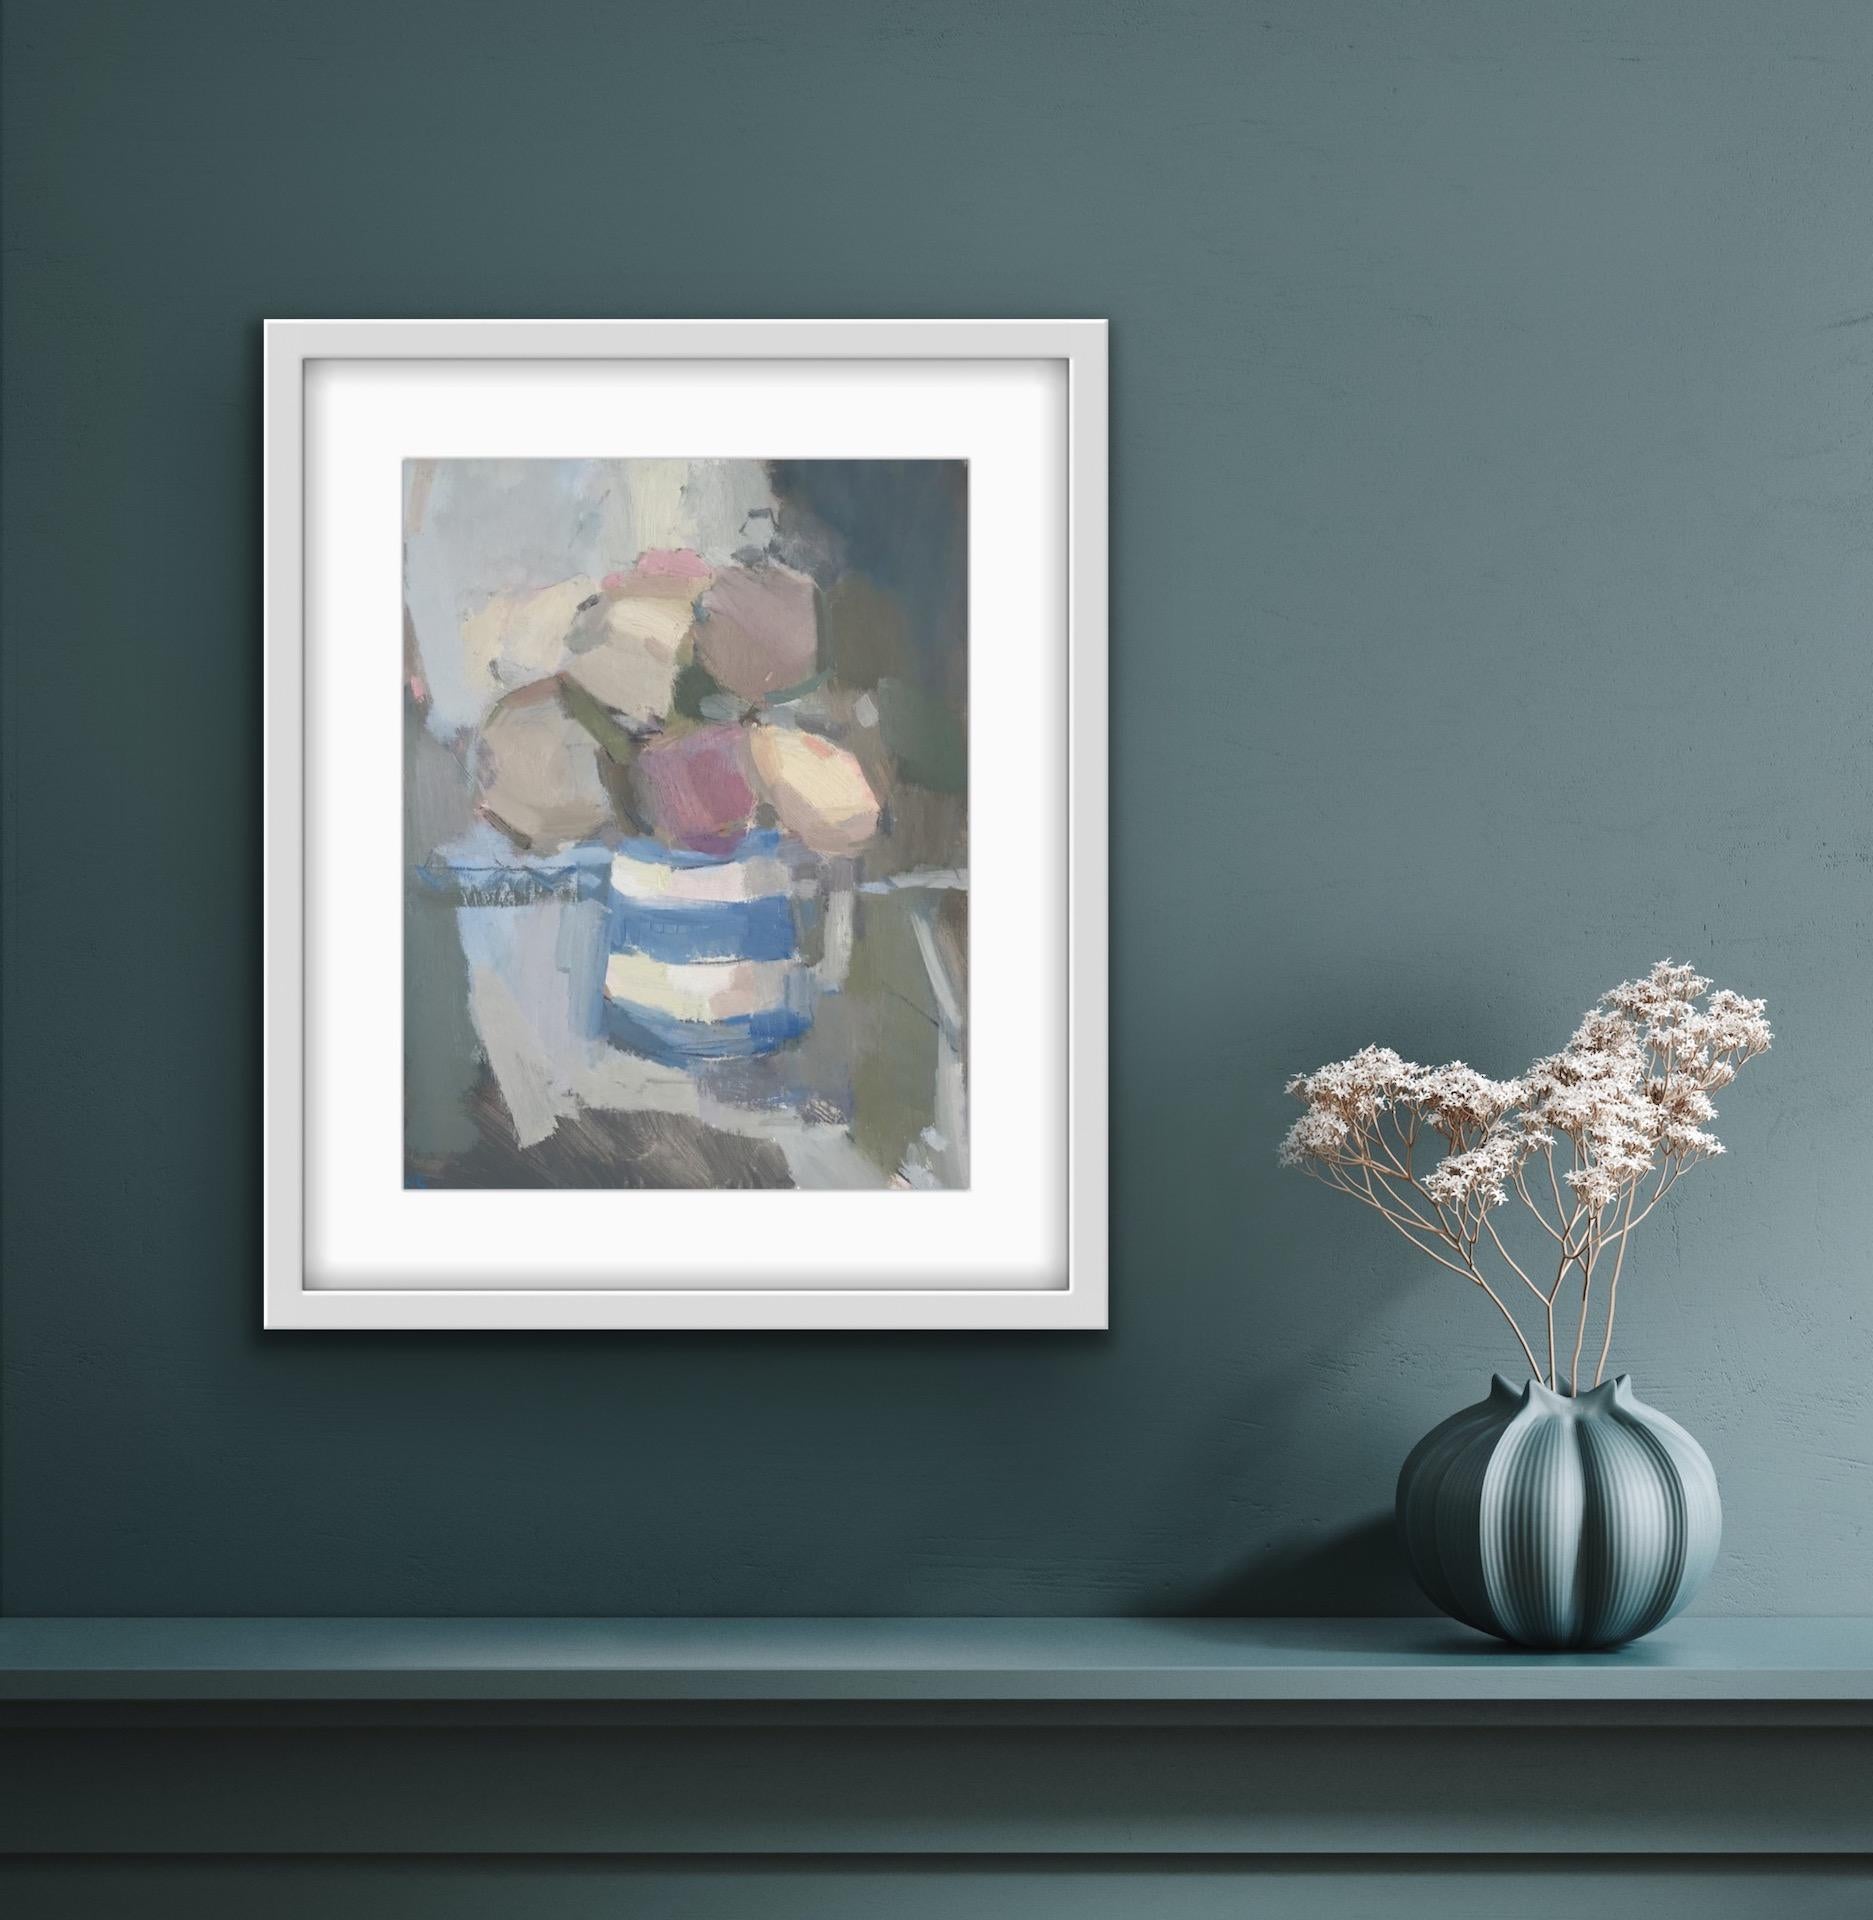 Still life with Cornishware Jug [2021]
Original
Flowers
Oil paint on board
Board Size: H:35 cm x W:28 cm x D:2cm
Sold Unframed
Please note that insitu images are purely an indication of how a piece may look

Still life with cornishware jug was